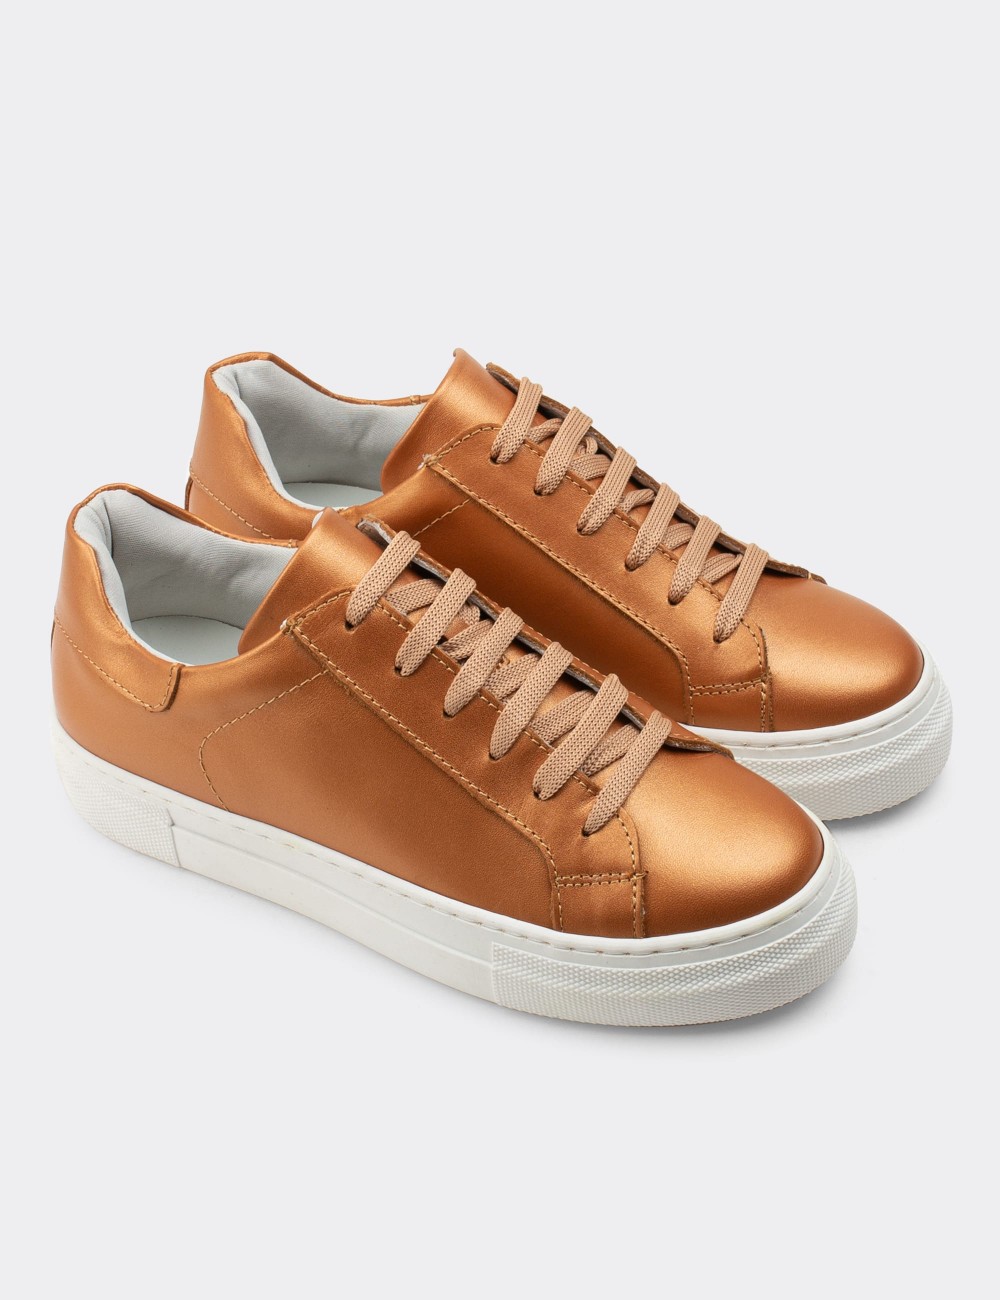 Bronze  Leather Sneakers - Z1681ZBRNC01